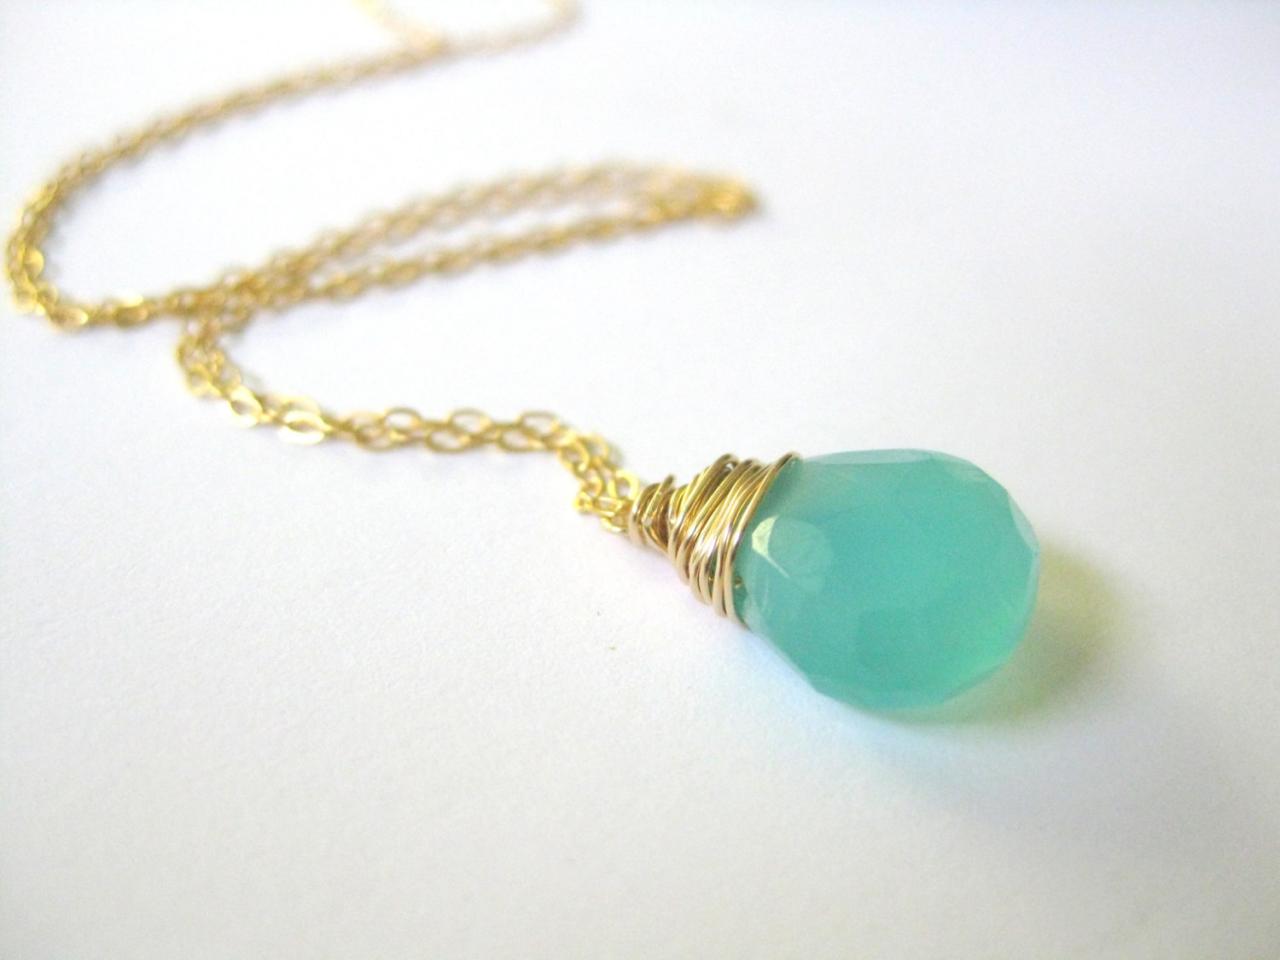 Aqua Blue Chalcedony And Gold Necklace. 14k Gold Filled Wire Wrapped Semi-precious Chalcedony Gemstone On Fine Gold Chain.